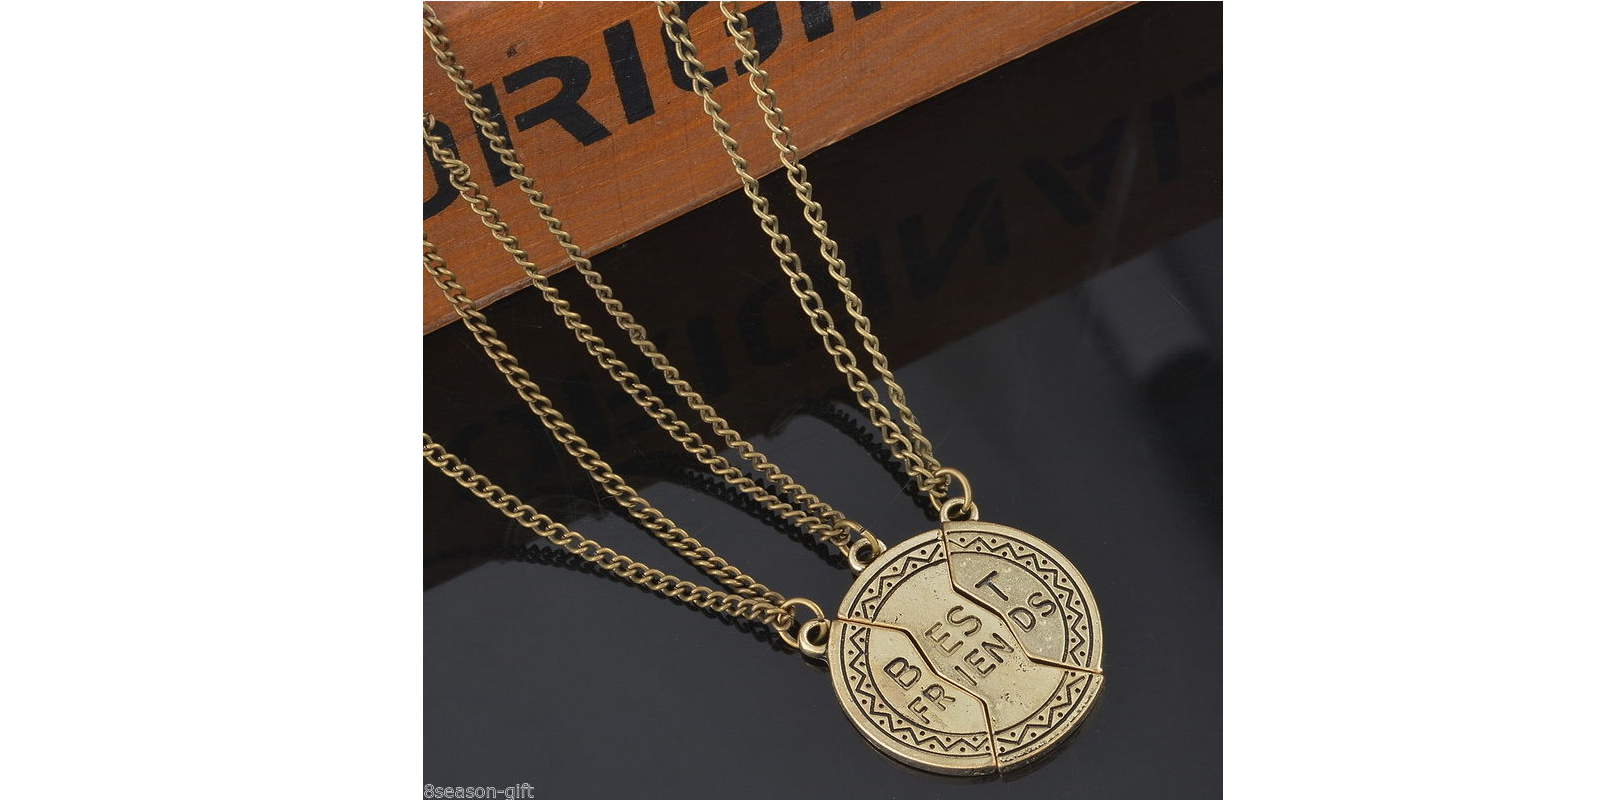 3-pc Best Friends Necklace ONLY $1.61 SHIPPED!